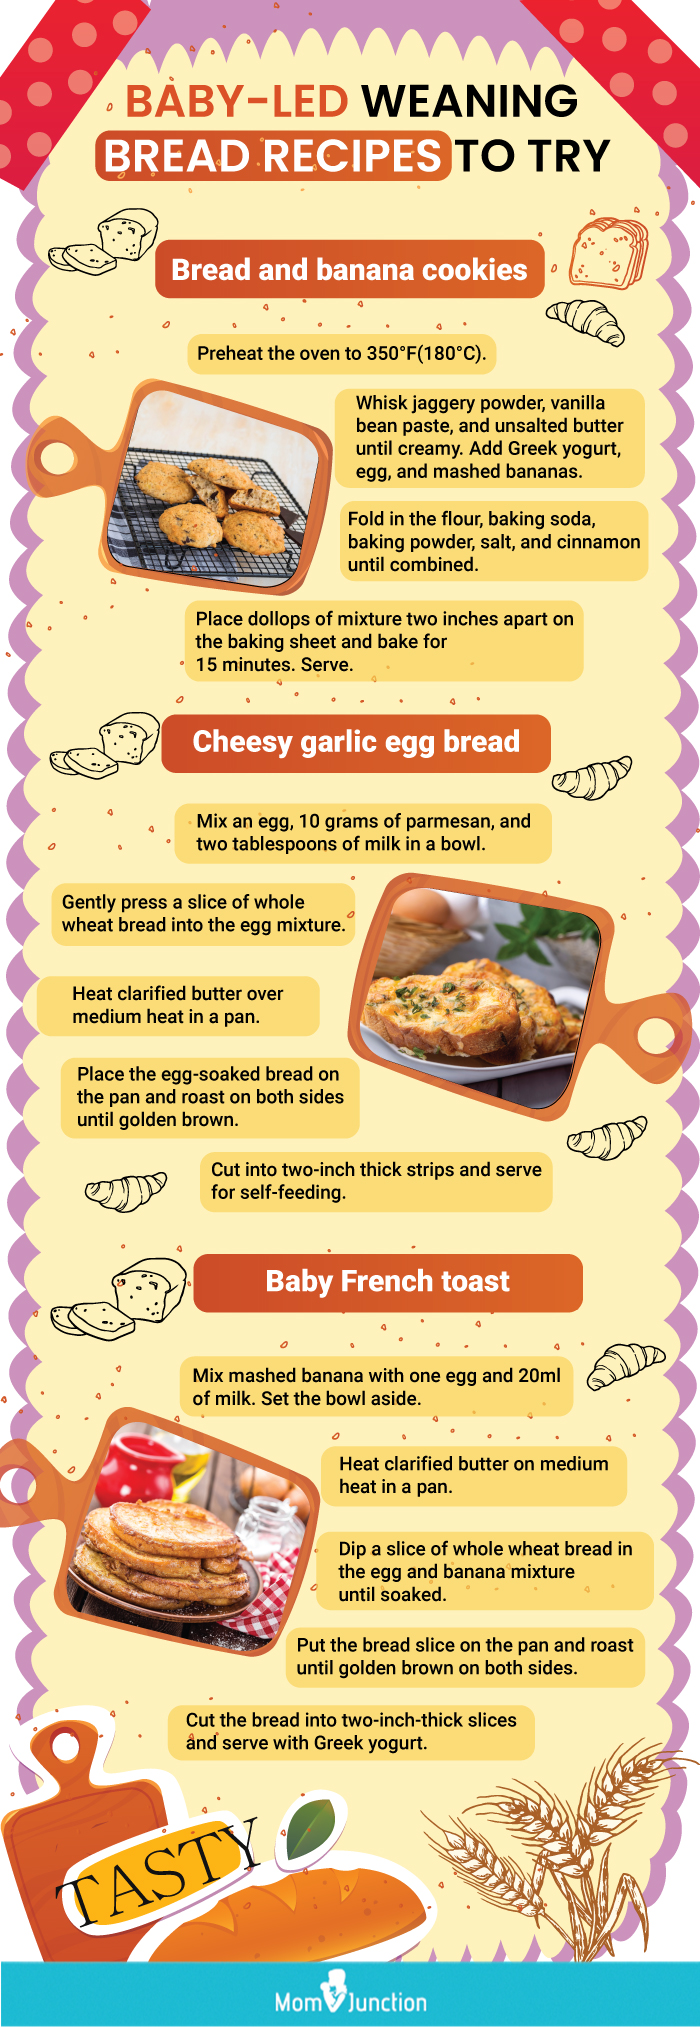 baby led weaning bread recipes to try (infographic)